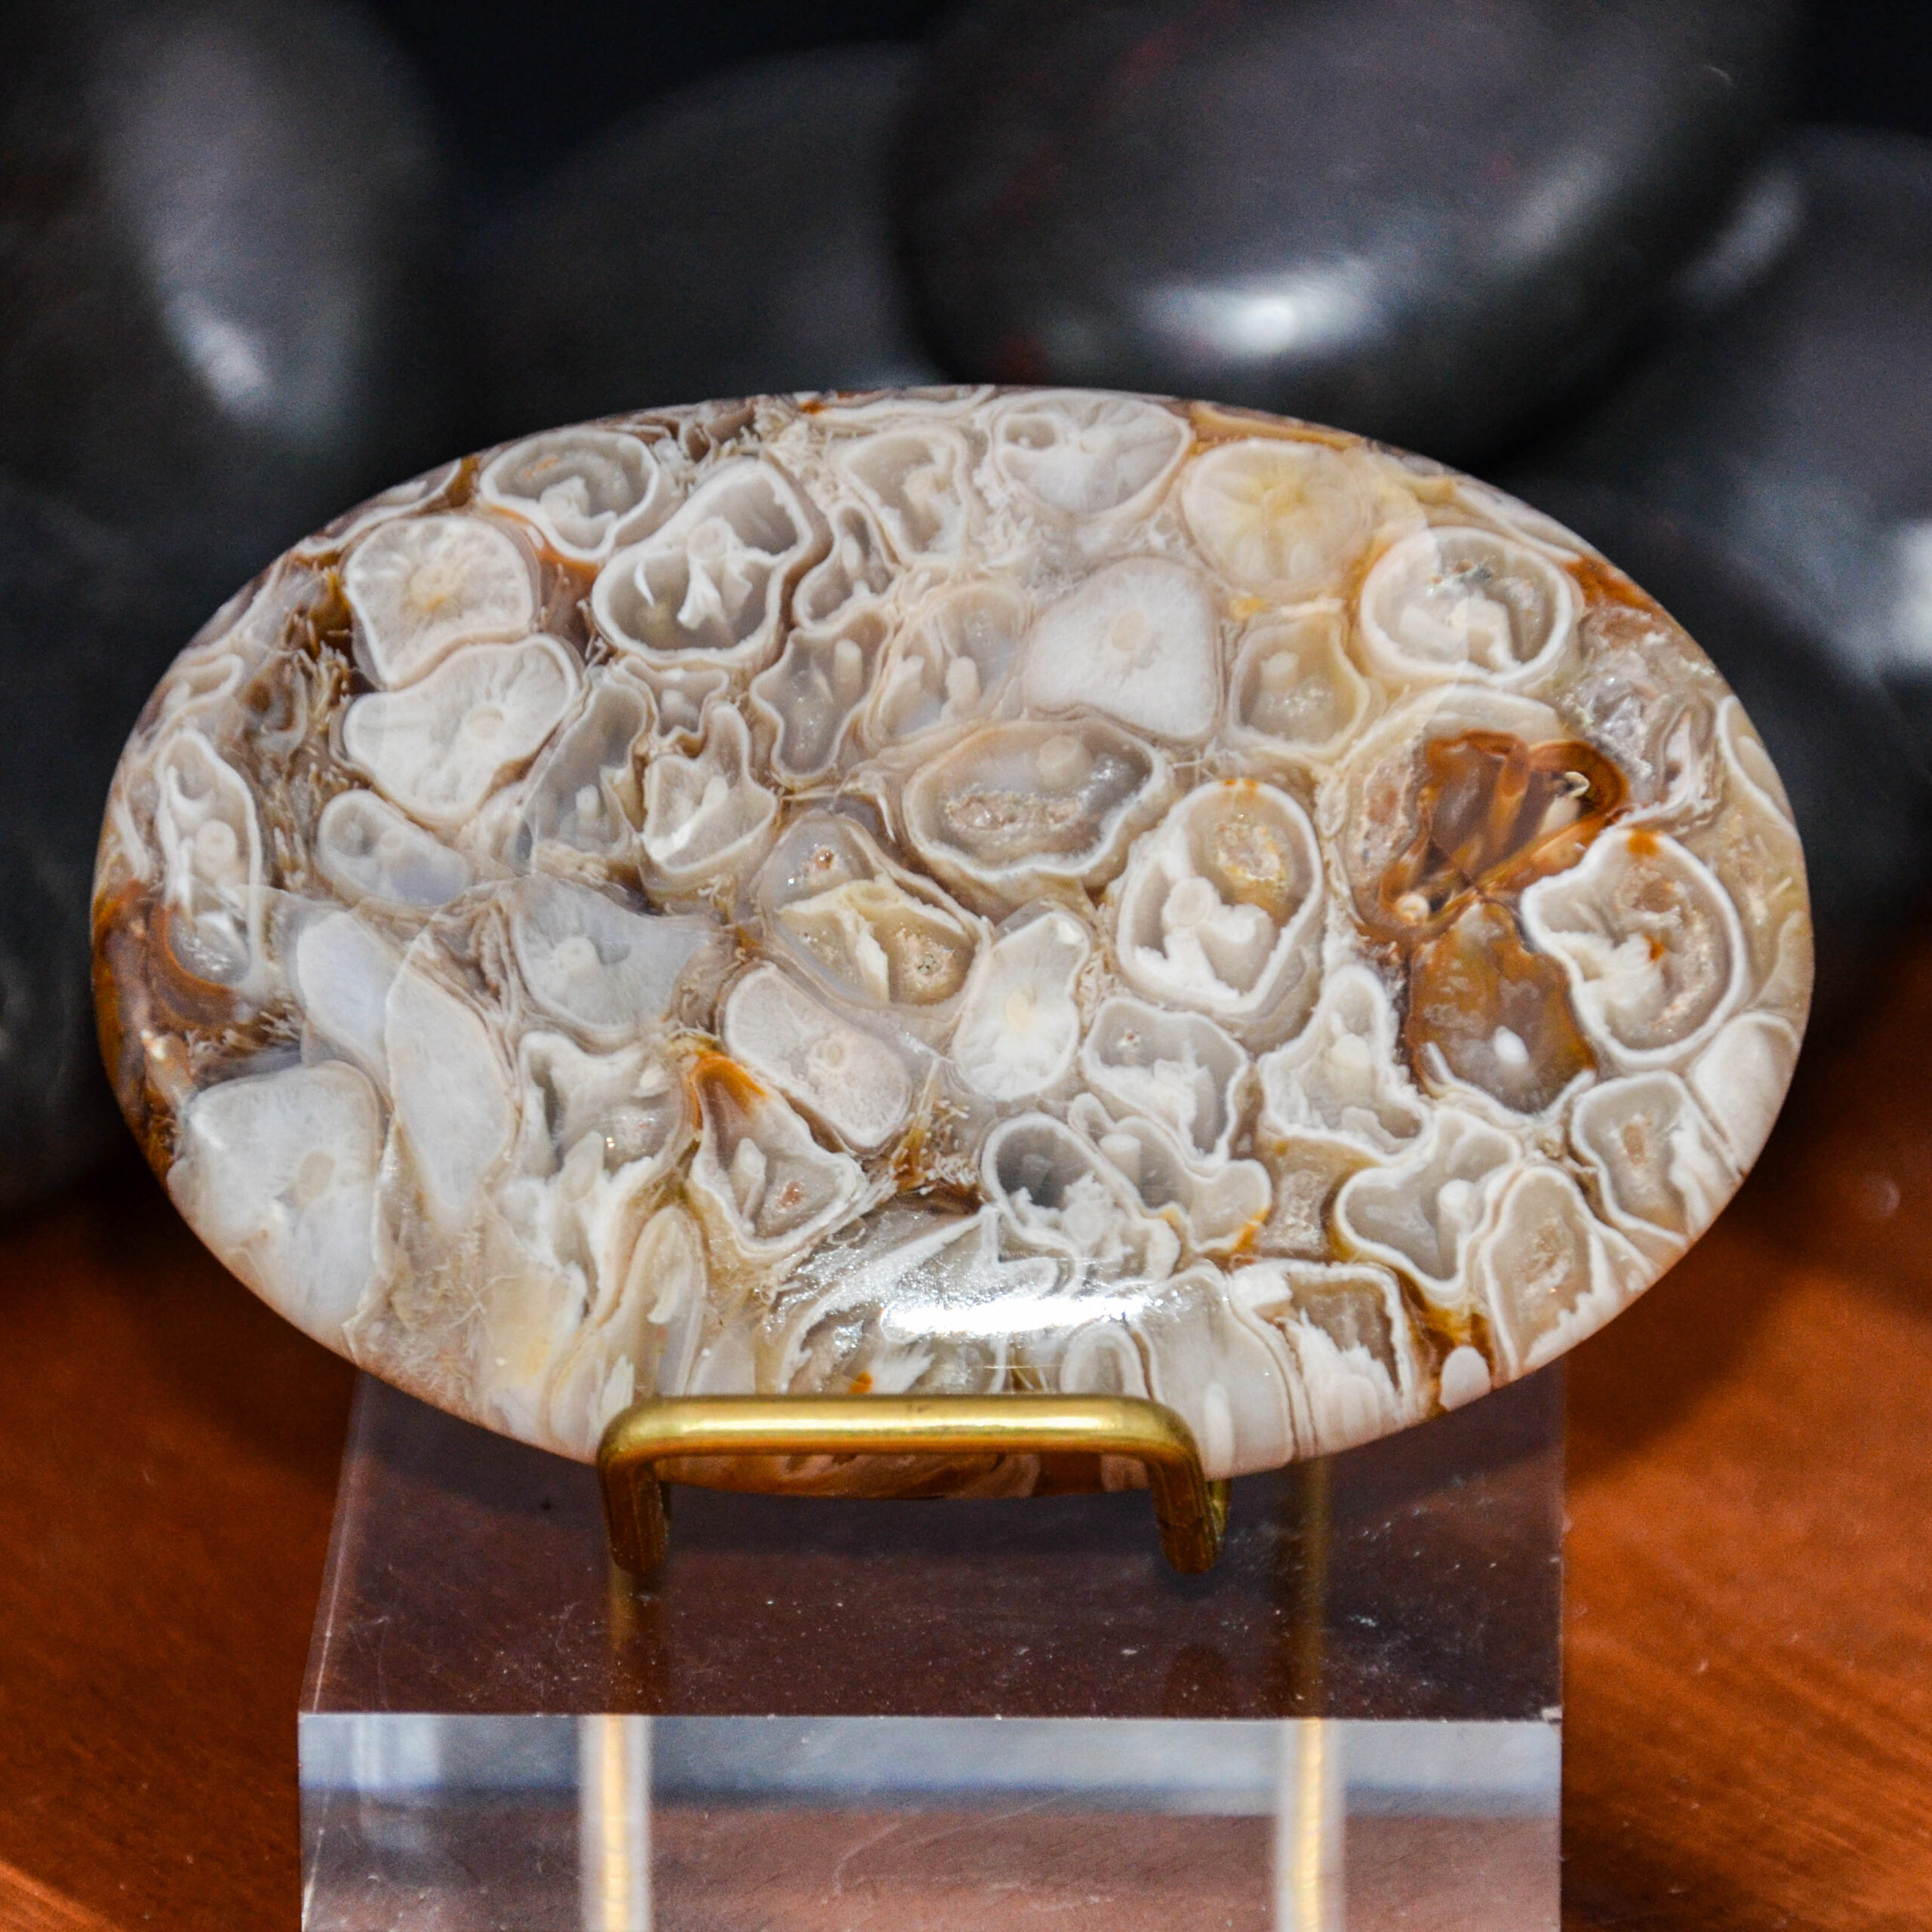 Peanut Fossil Palm Stone is a polished stone with a mix of shades of browns, tans, and blacks in the shape of peanuts throughout.